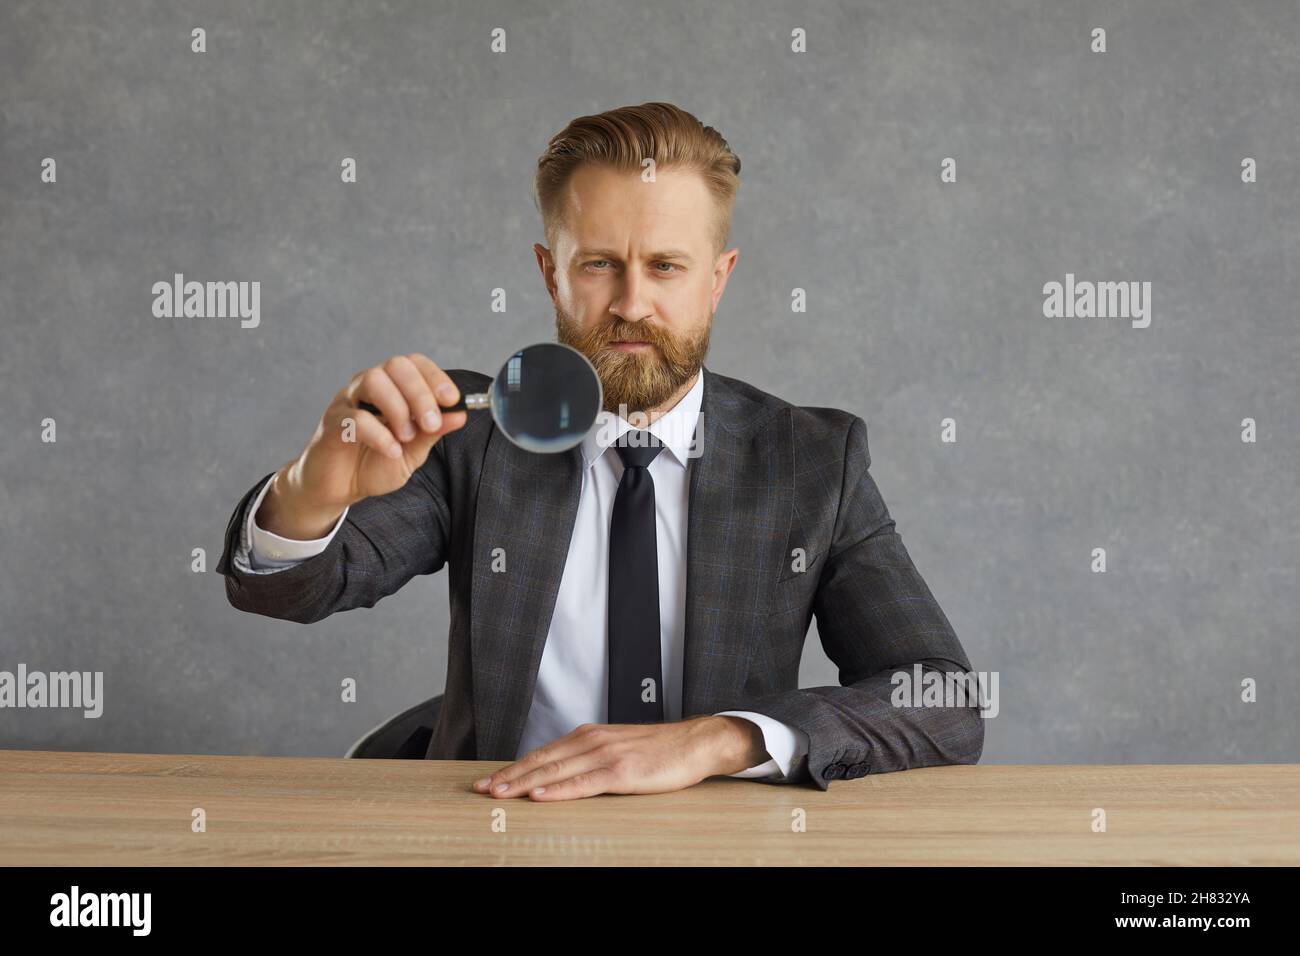 Serious focused businessman sitting at a table and looking through a magnifying glass. Stock Photo